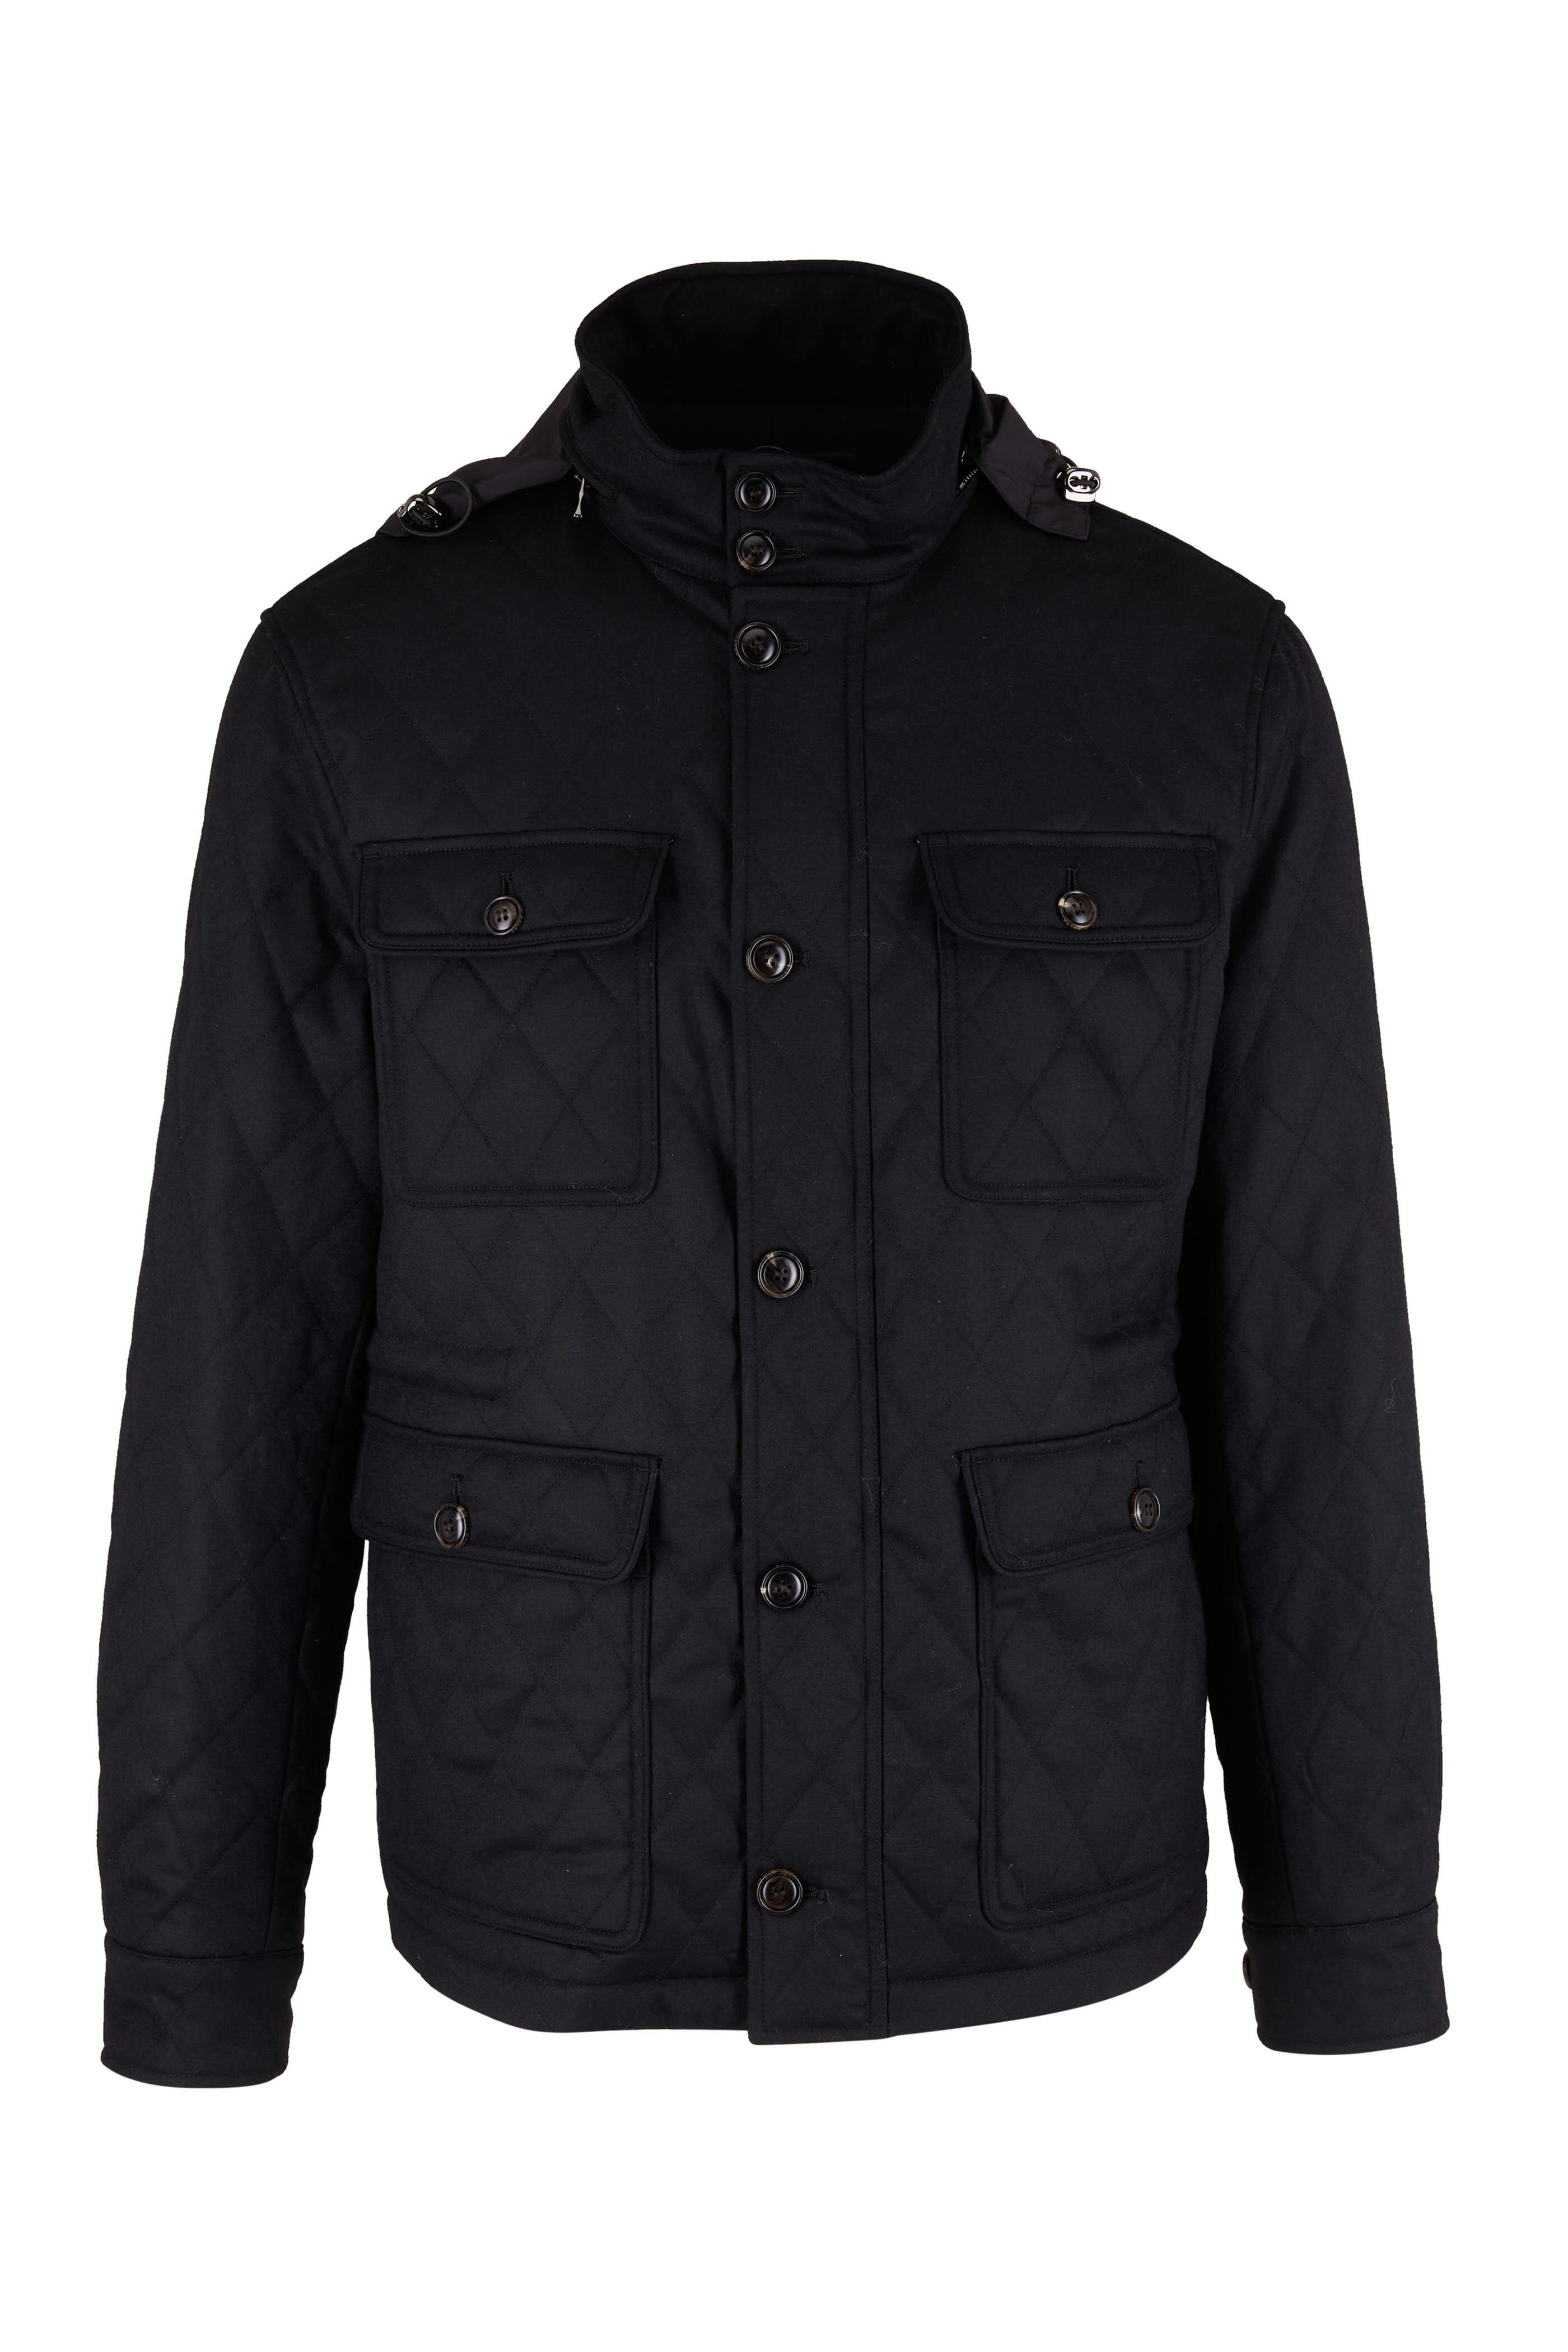 Peter Millar - Collection Black Quilted Wool Jacket